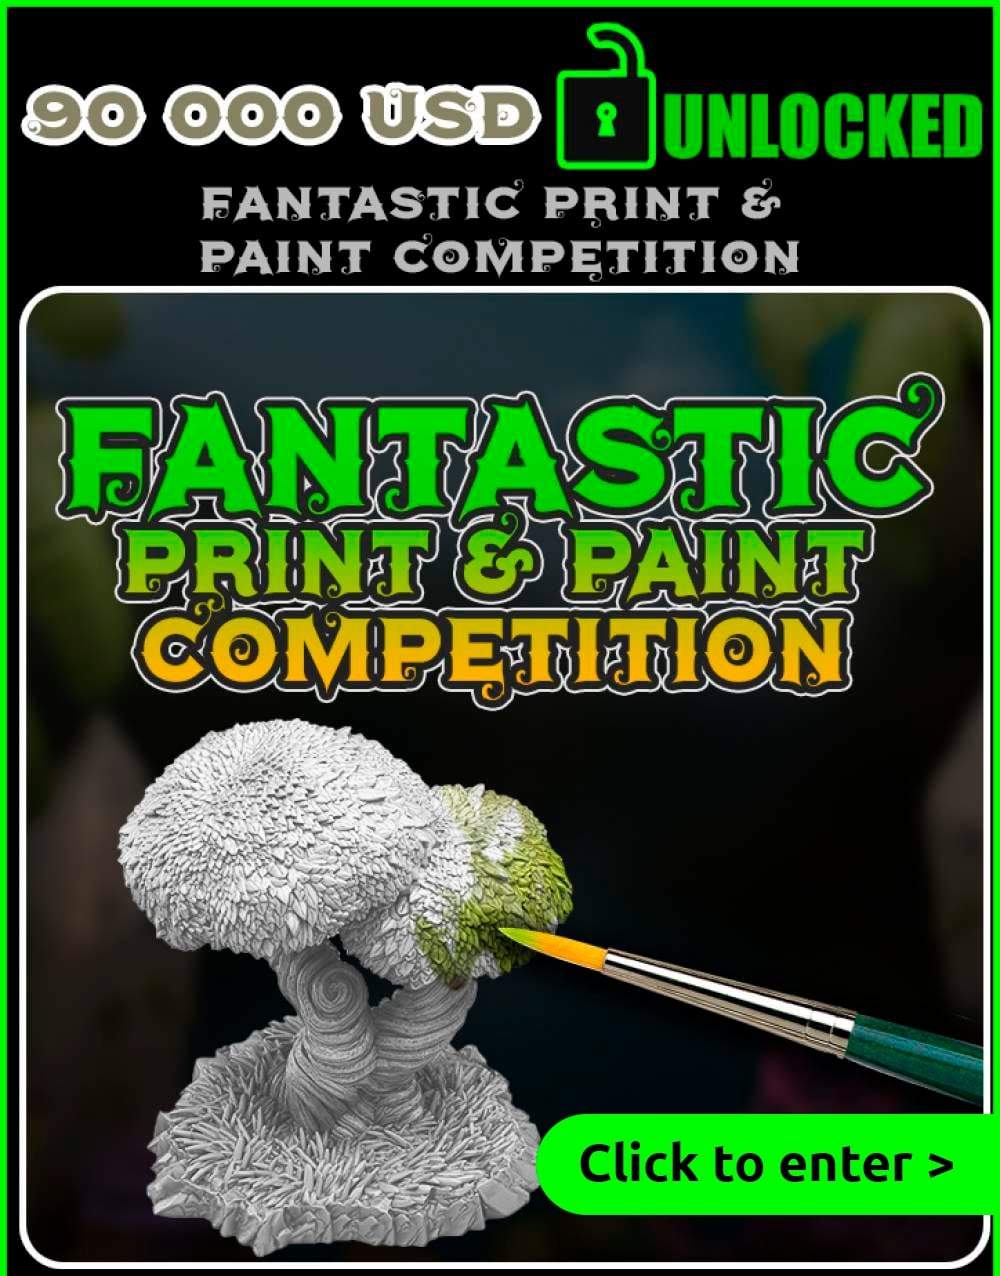 Print and Paint Competition